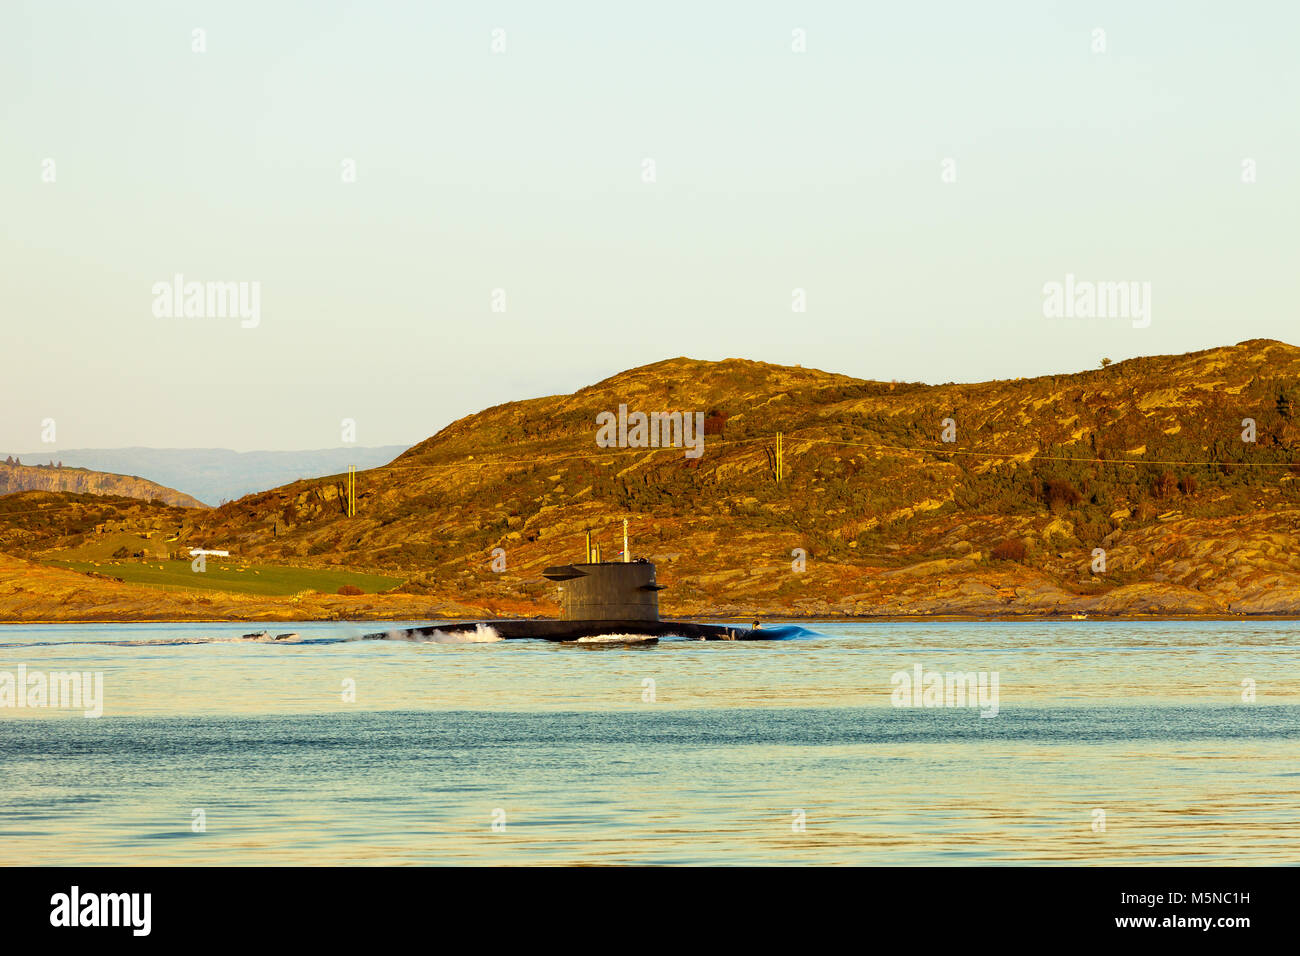 Submarine arriving at port in Norway. Stock Photo